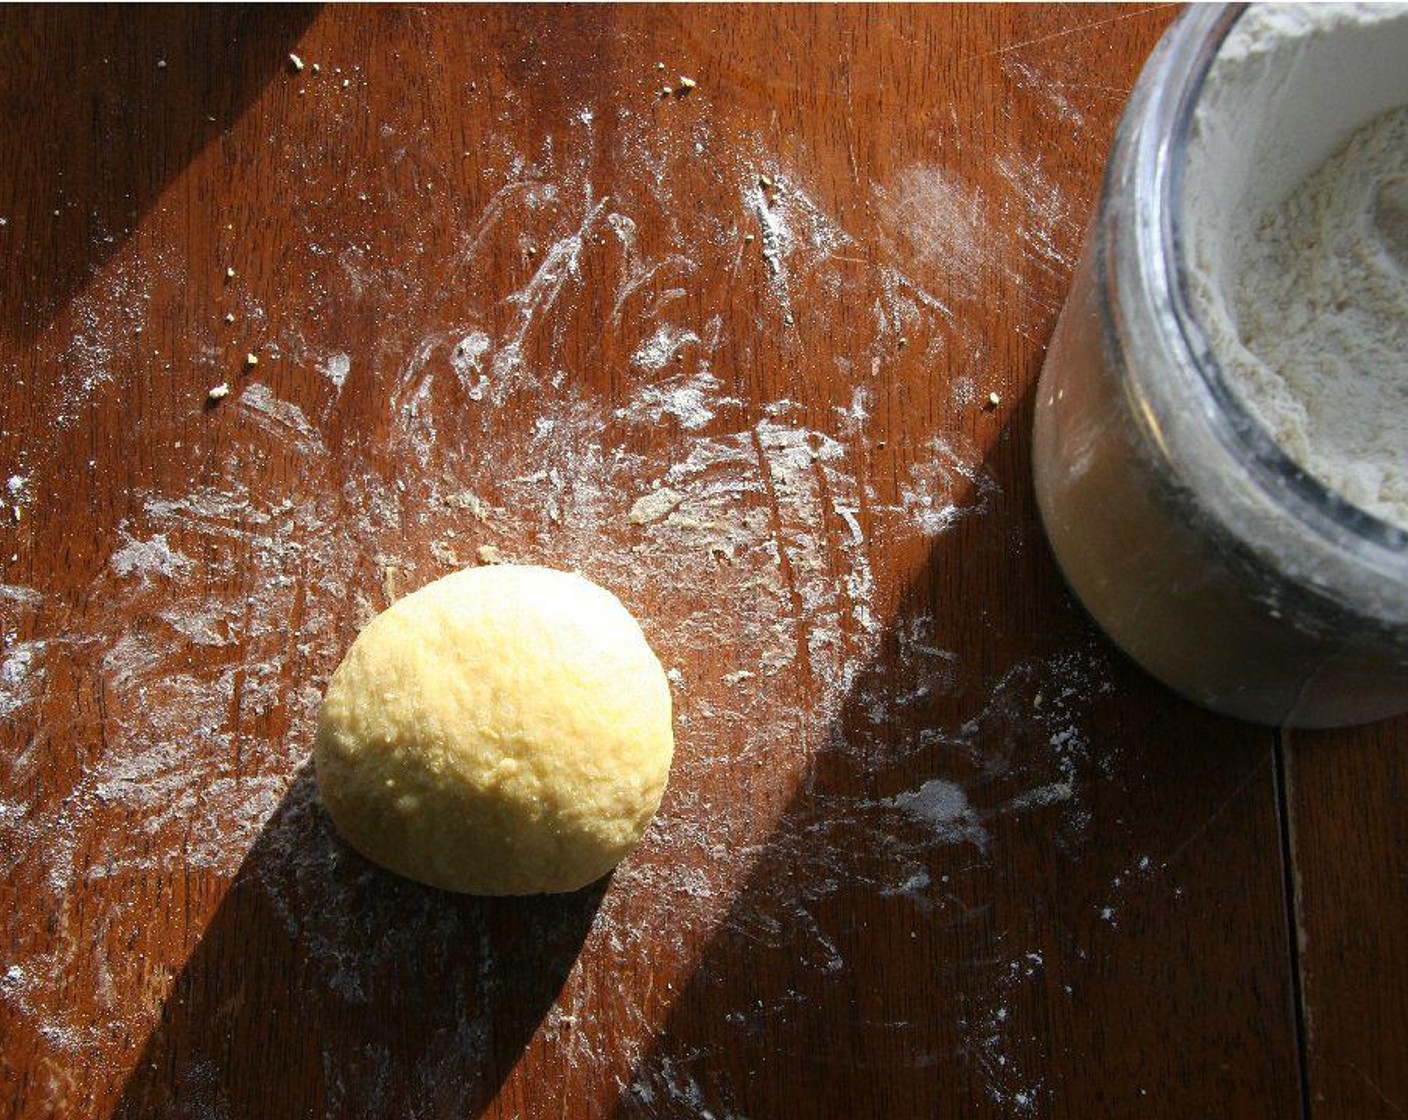 step 1 Make a well with Unbleached All-Purpose Flour (1 cup) on a work surface and add Eggs (2). Using your fingers, work the dough until it is smooth, adding flour whenever it seems too moist. Let it rest in the fridge for a half hour.